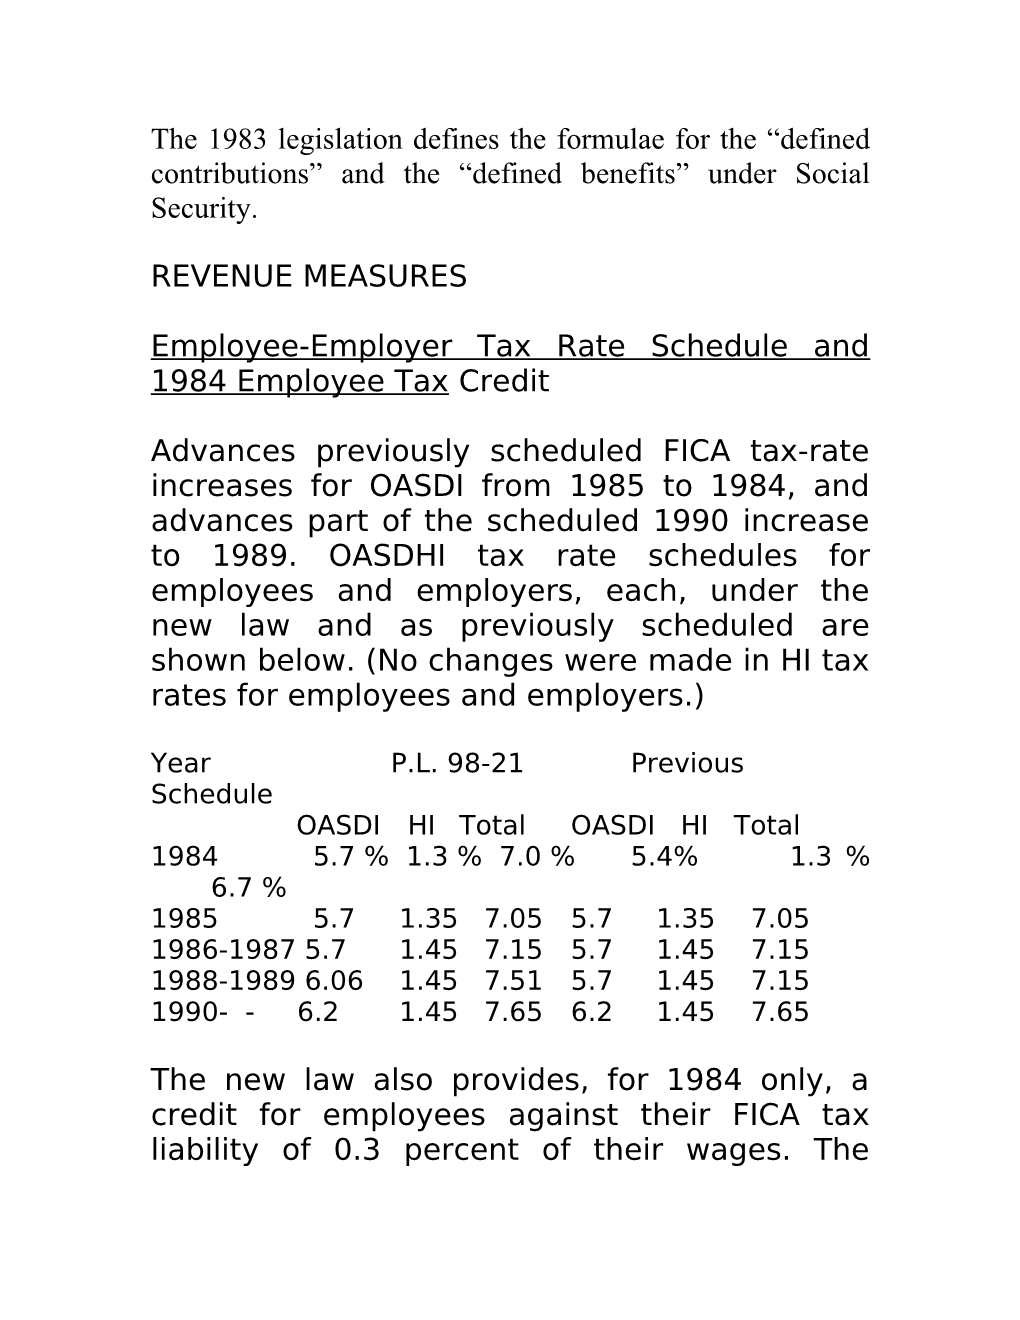 Employee-Employer Tax Rate Schedule and 1984 Employee Tax Credit